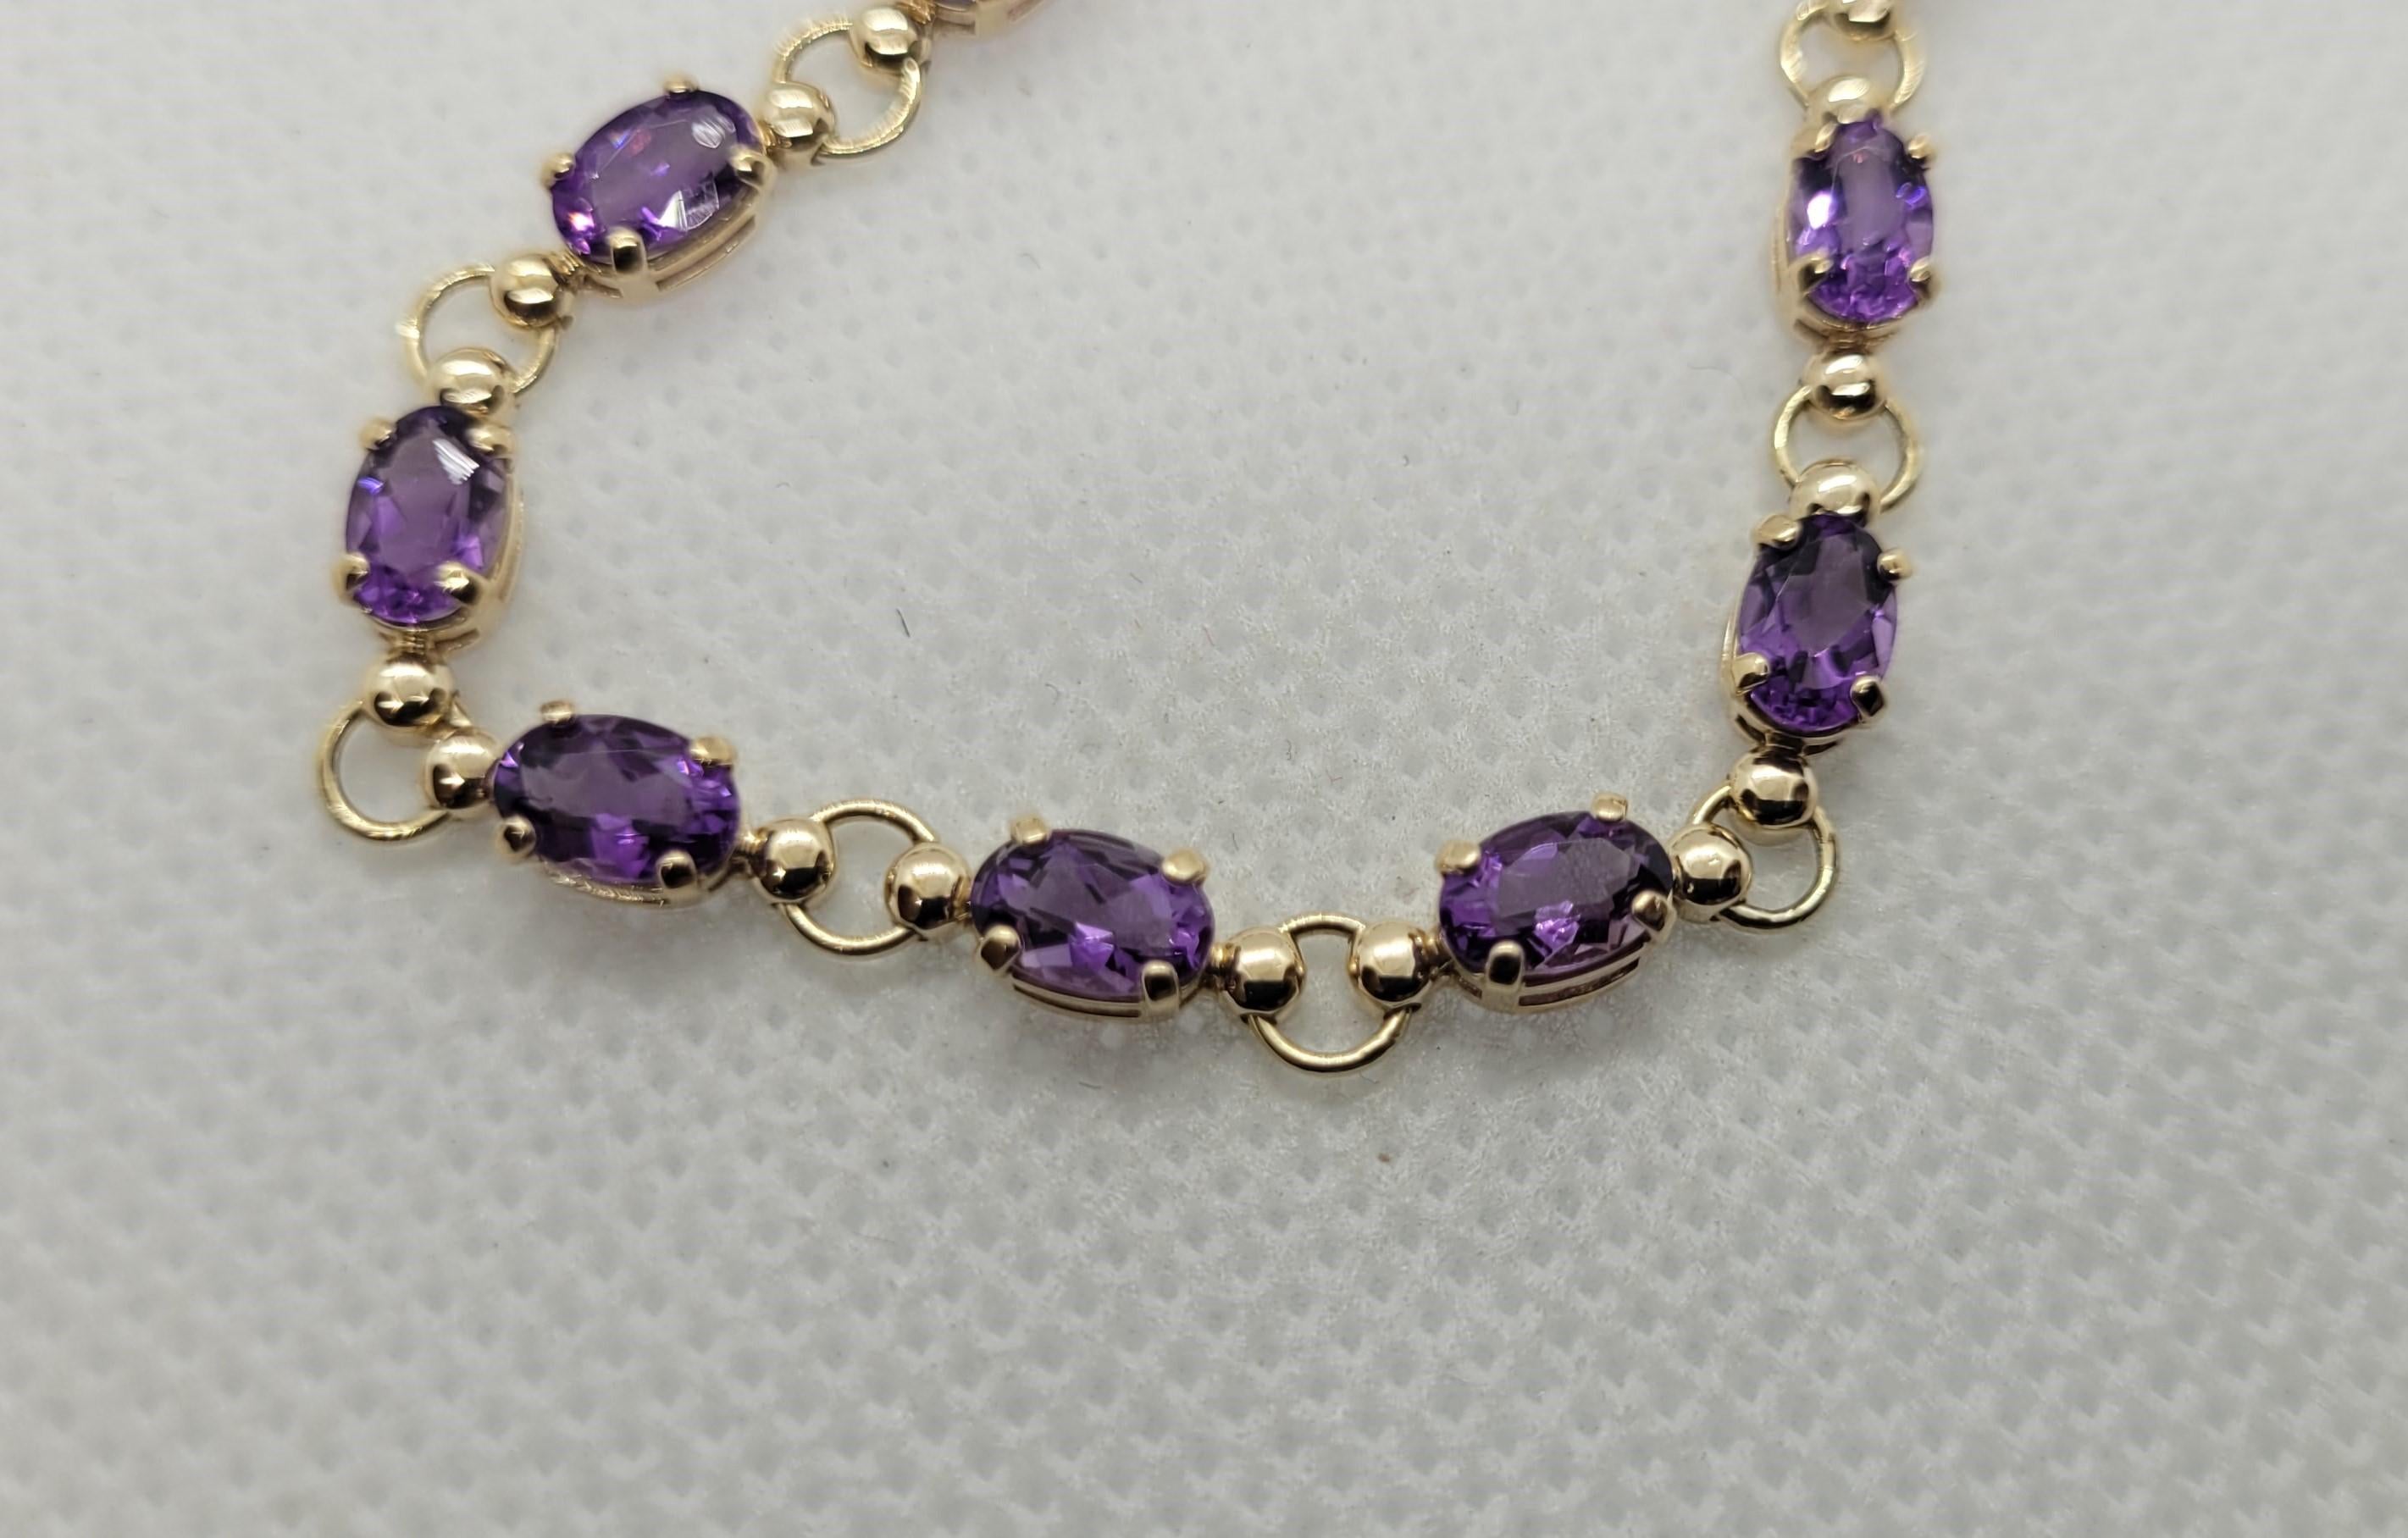 Modern Yellow Gold Amethyst Bracelet, 6 x 4 mm Oval Amethyst, 10kt Gold, 7.25 Inches For Sale